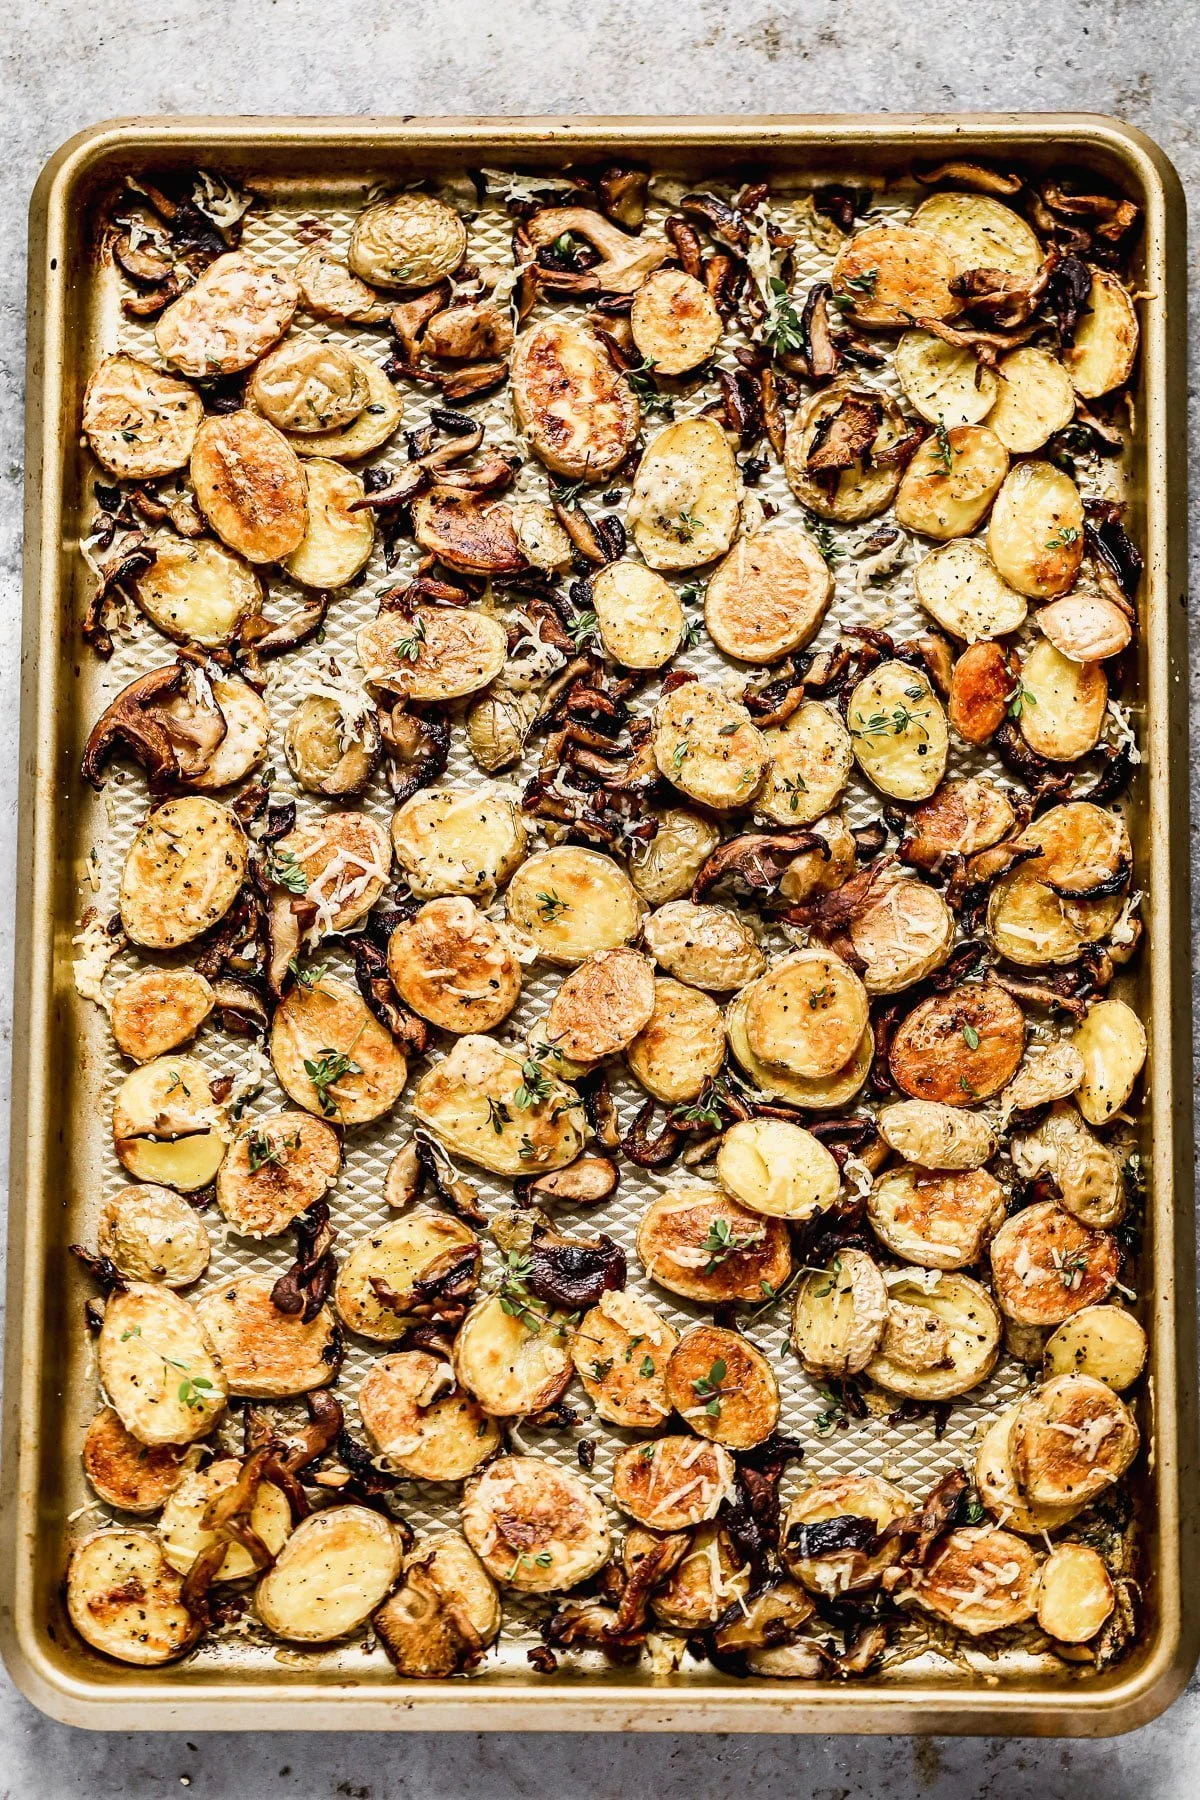 Crispy Parmesan Roasted Potatoes and Mushrooms, always. We roast buttery yukon gold potatoes and woodsy shiitake mushrooms until they're irresistibly crispy and golden, then toss them with nutty parmesan cheese and fresh thyme. Simple, but so delicious.  